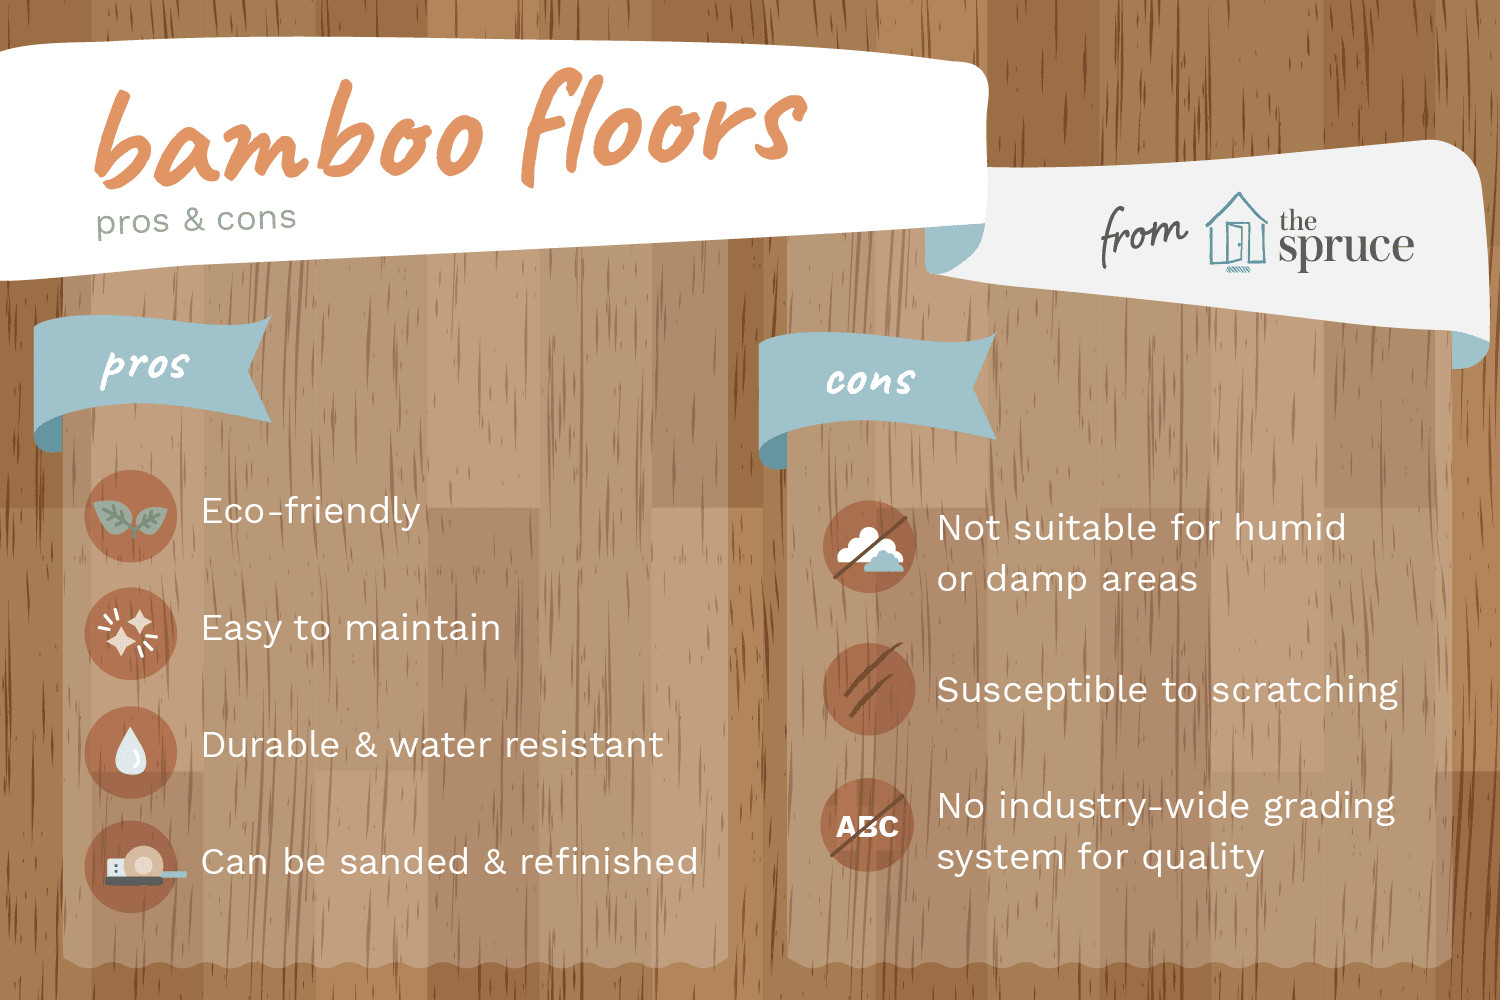 cost of refinishing hardwood floors canada of the advantages and disadvantages of bamboo flooring pertaining to benefits and drawbacks of bamboo floors 1314694 v3 5b102fccff1b780036c0a4fa